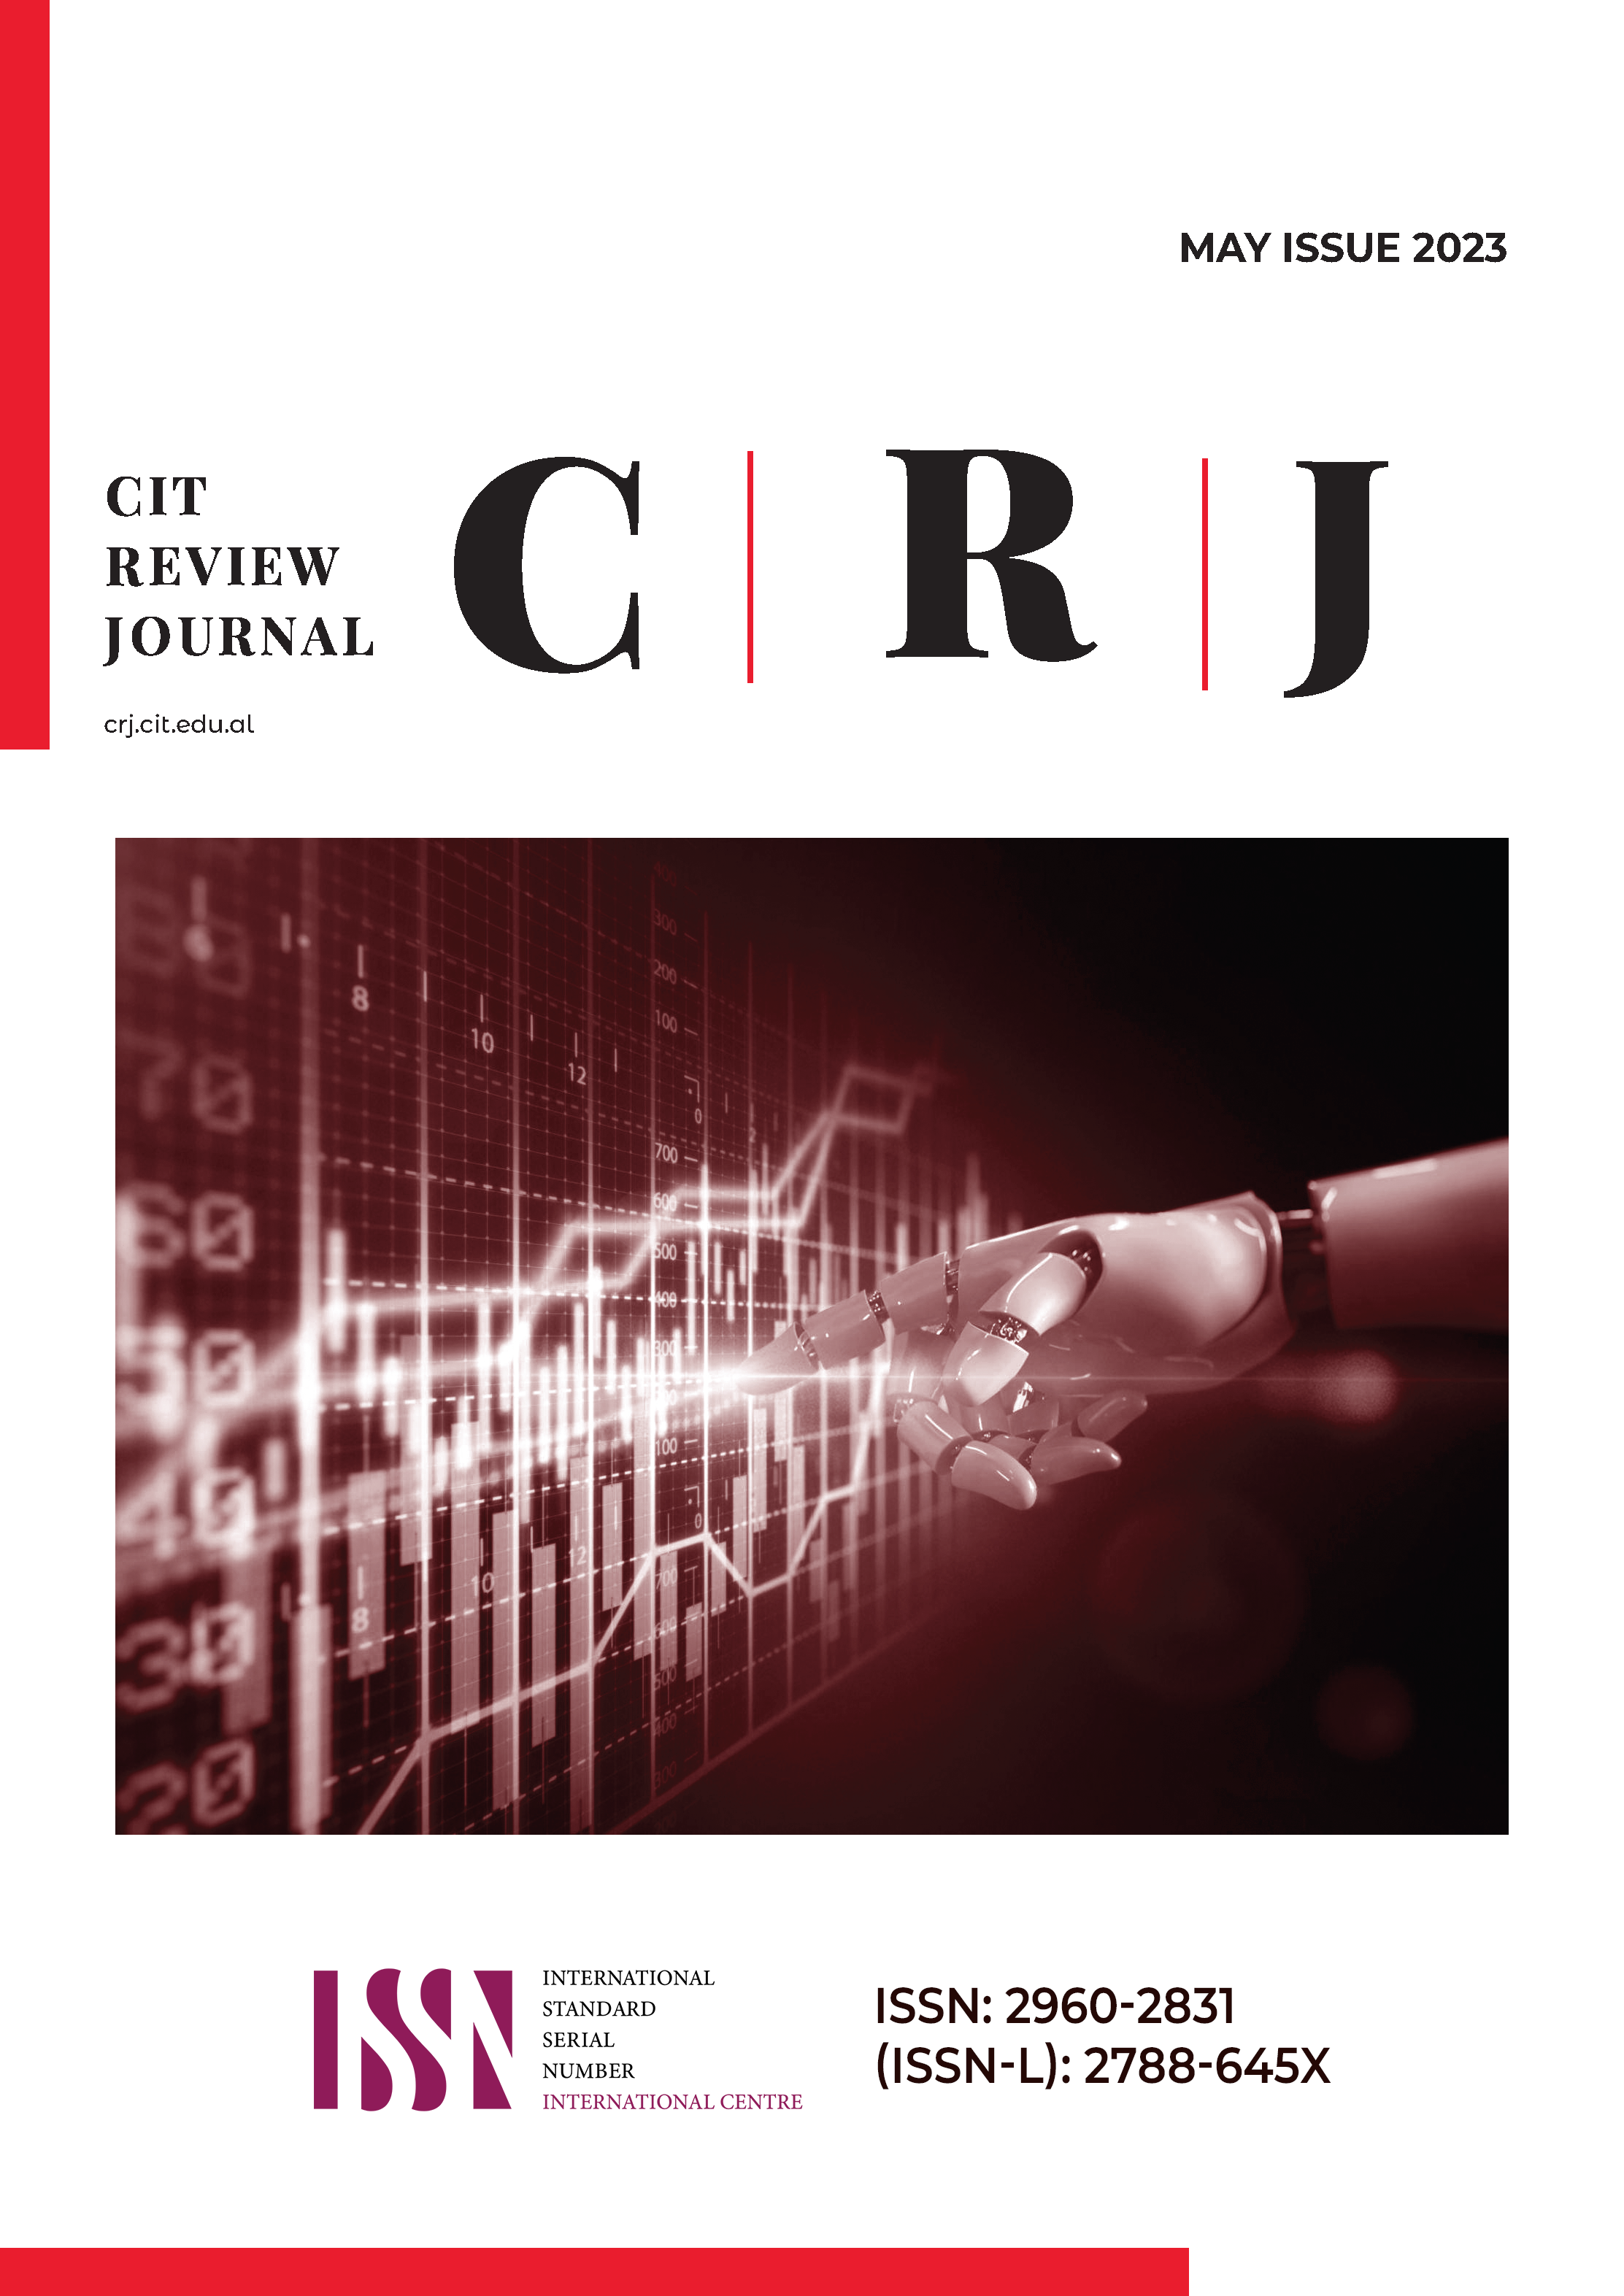 CIT Review Journal May Issue 2023